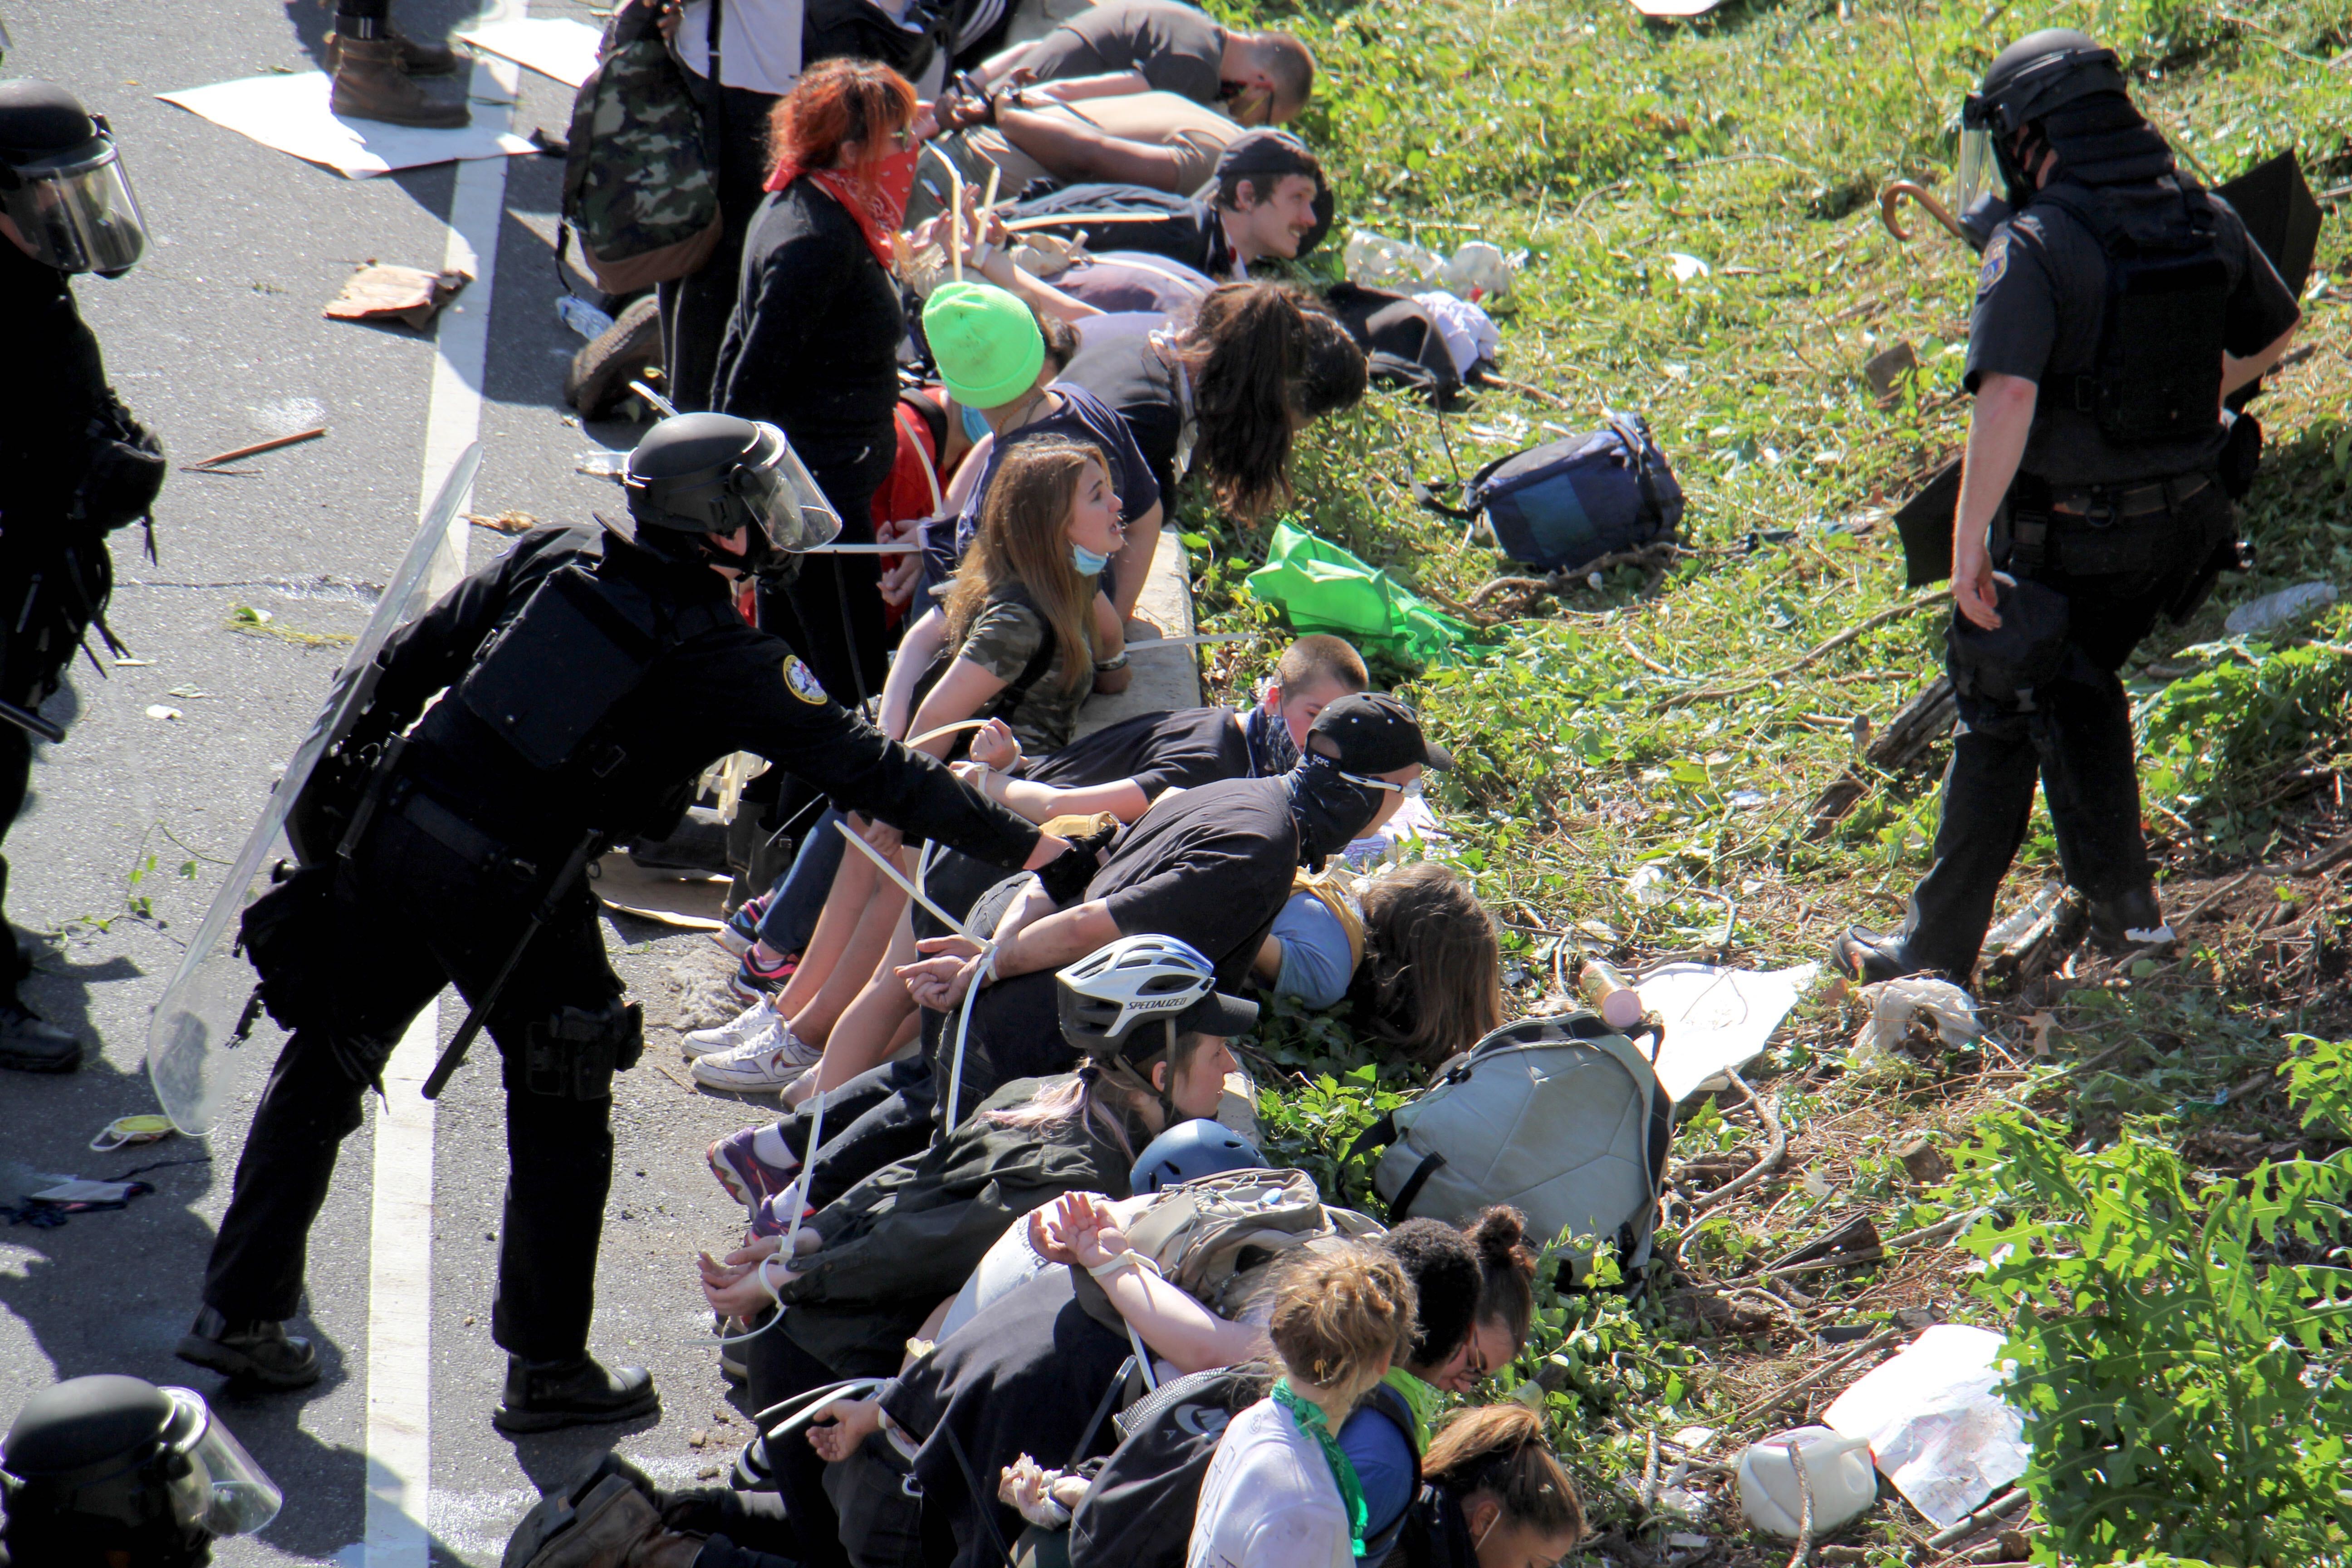 Police arrest dozens of protesters on Route 676 near 21st Street after they blocked traffic.